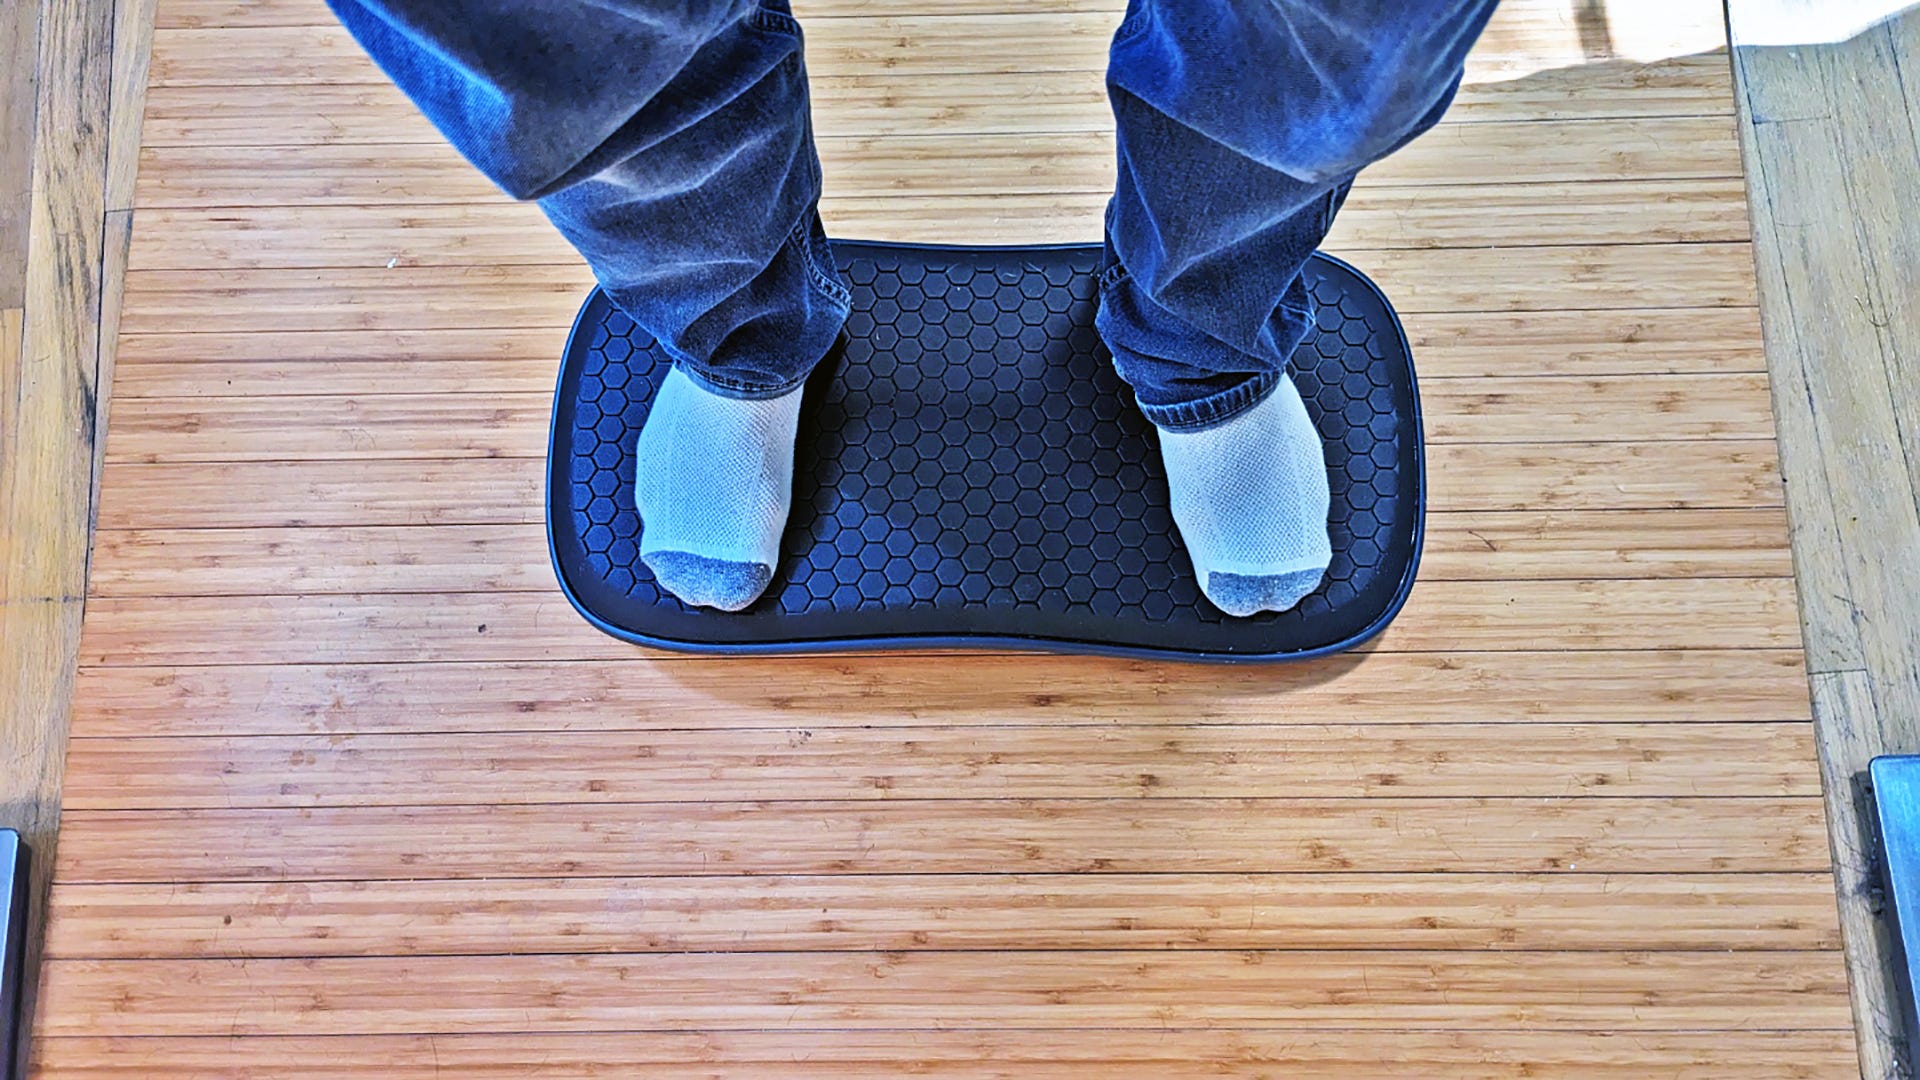 A person standing on a balance board 